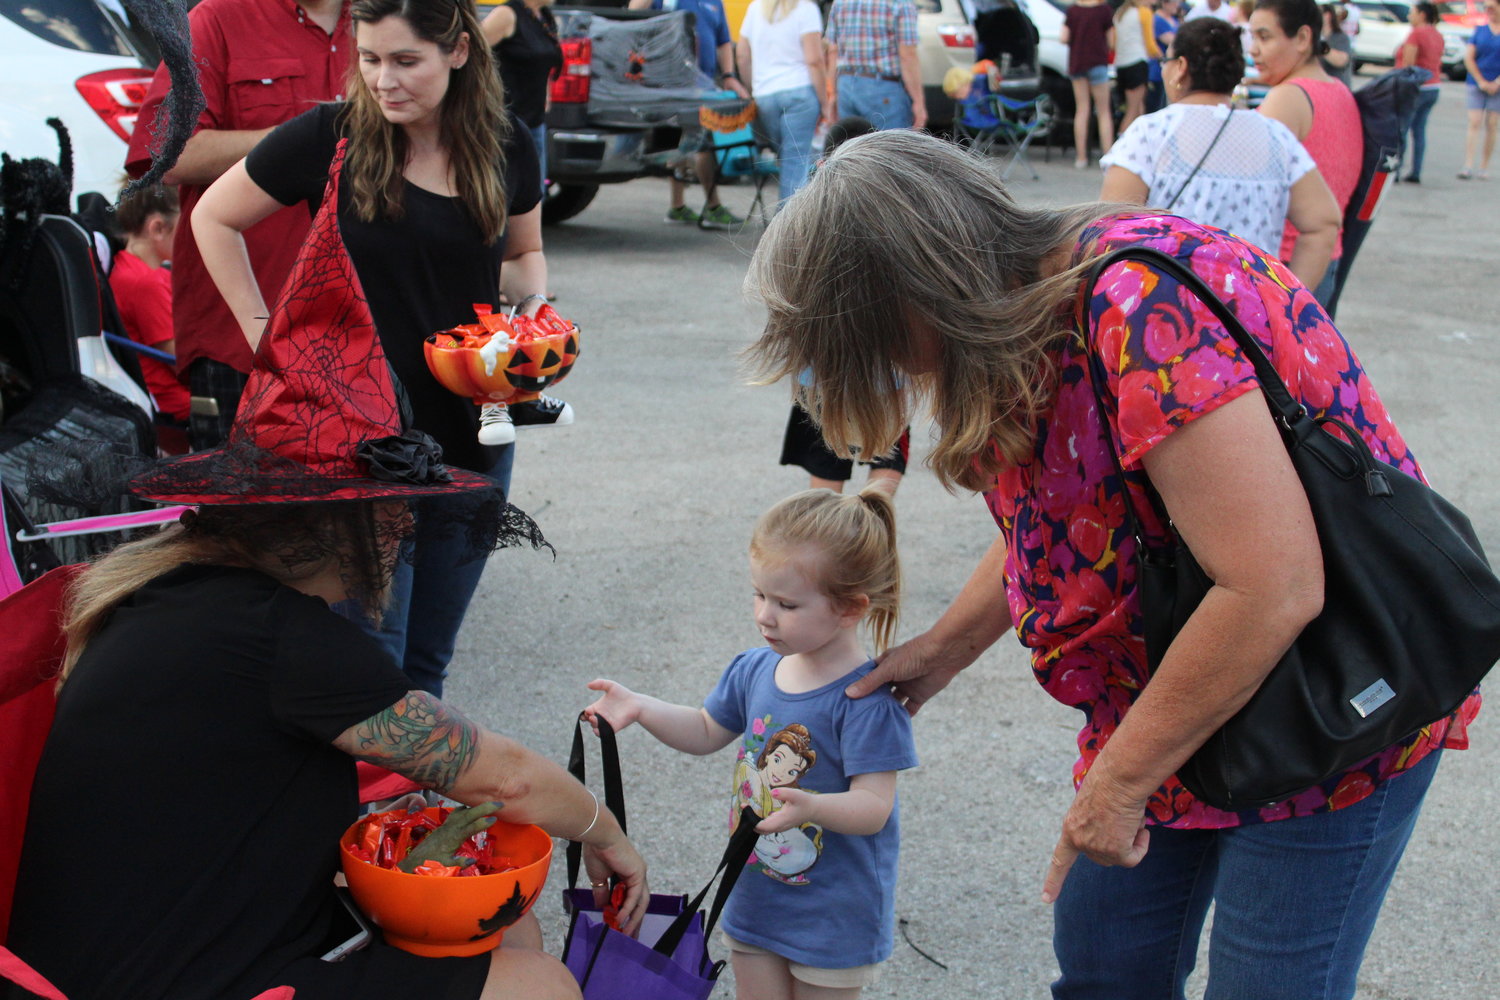 The Happy Fall Y’all celebration is back, with many kid-friendly activities including a costume contest, “trunk or treat,” and even a viewing of Hotel Transylvania 3 at the Lynn Theater.